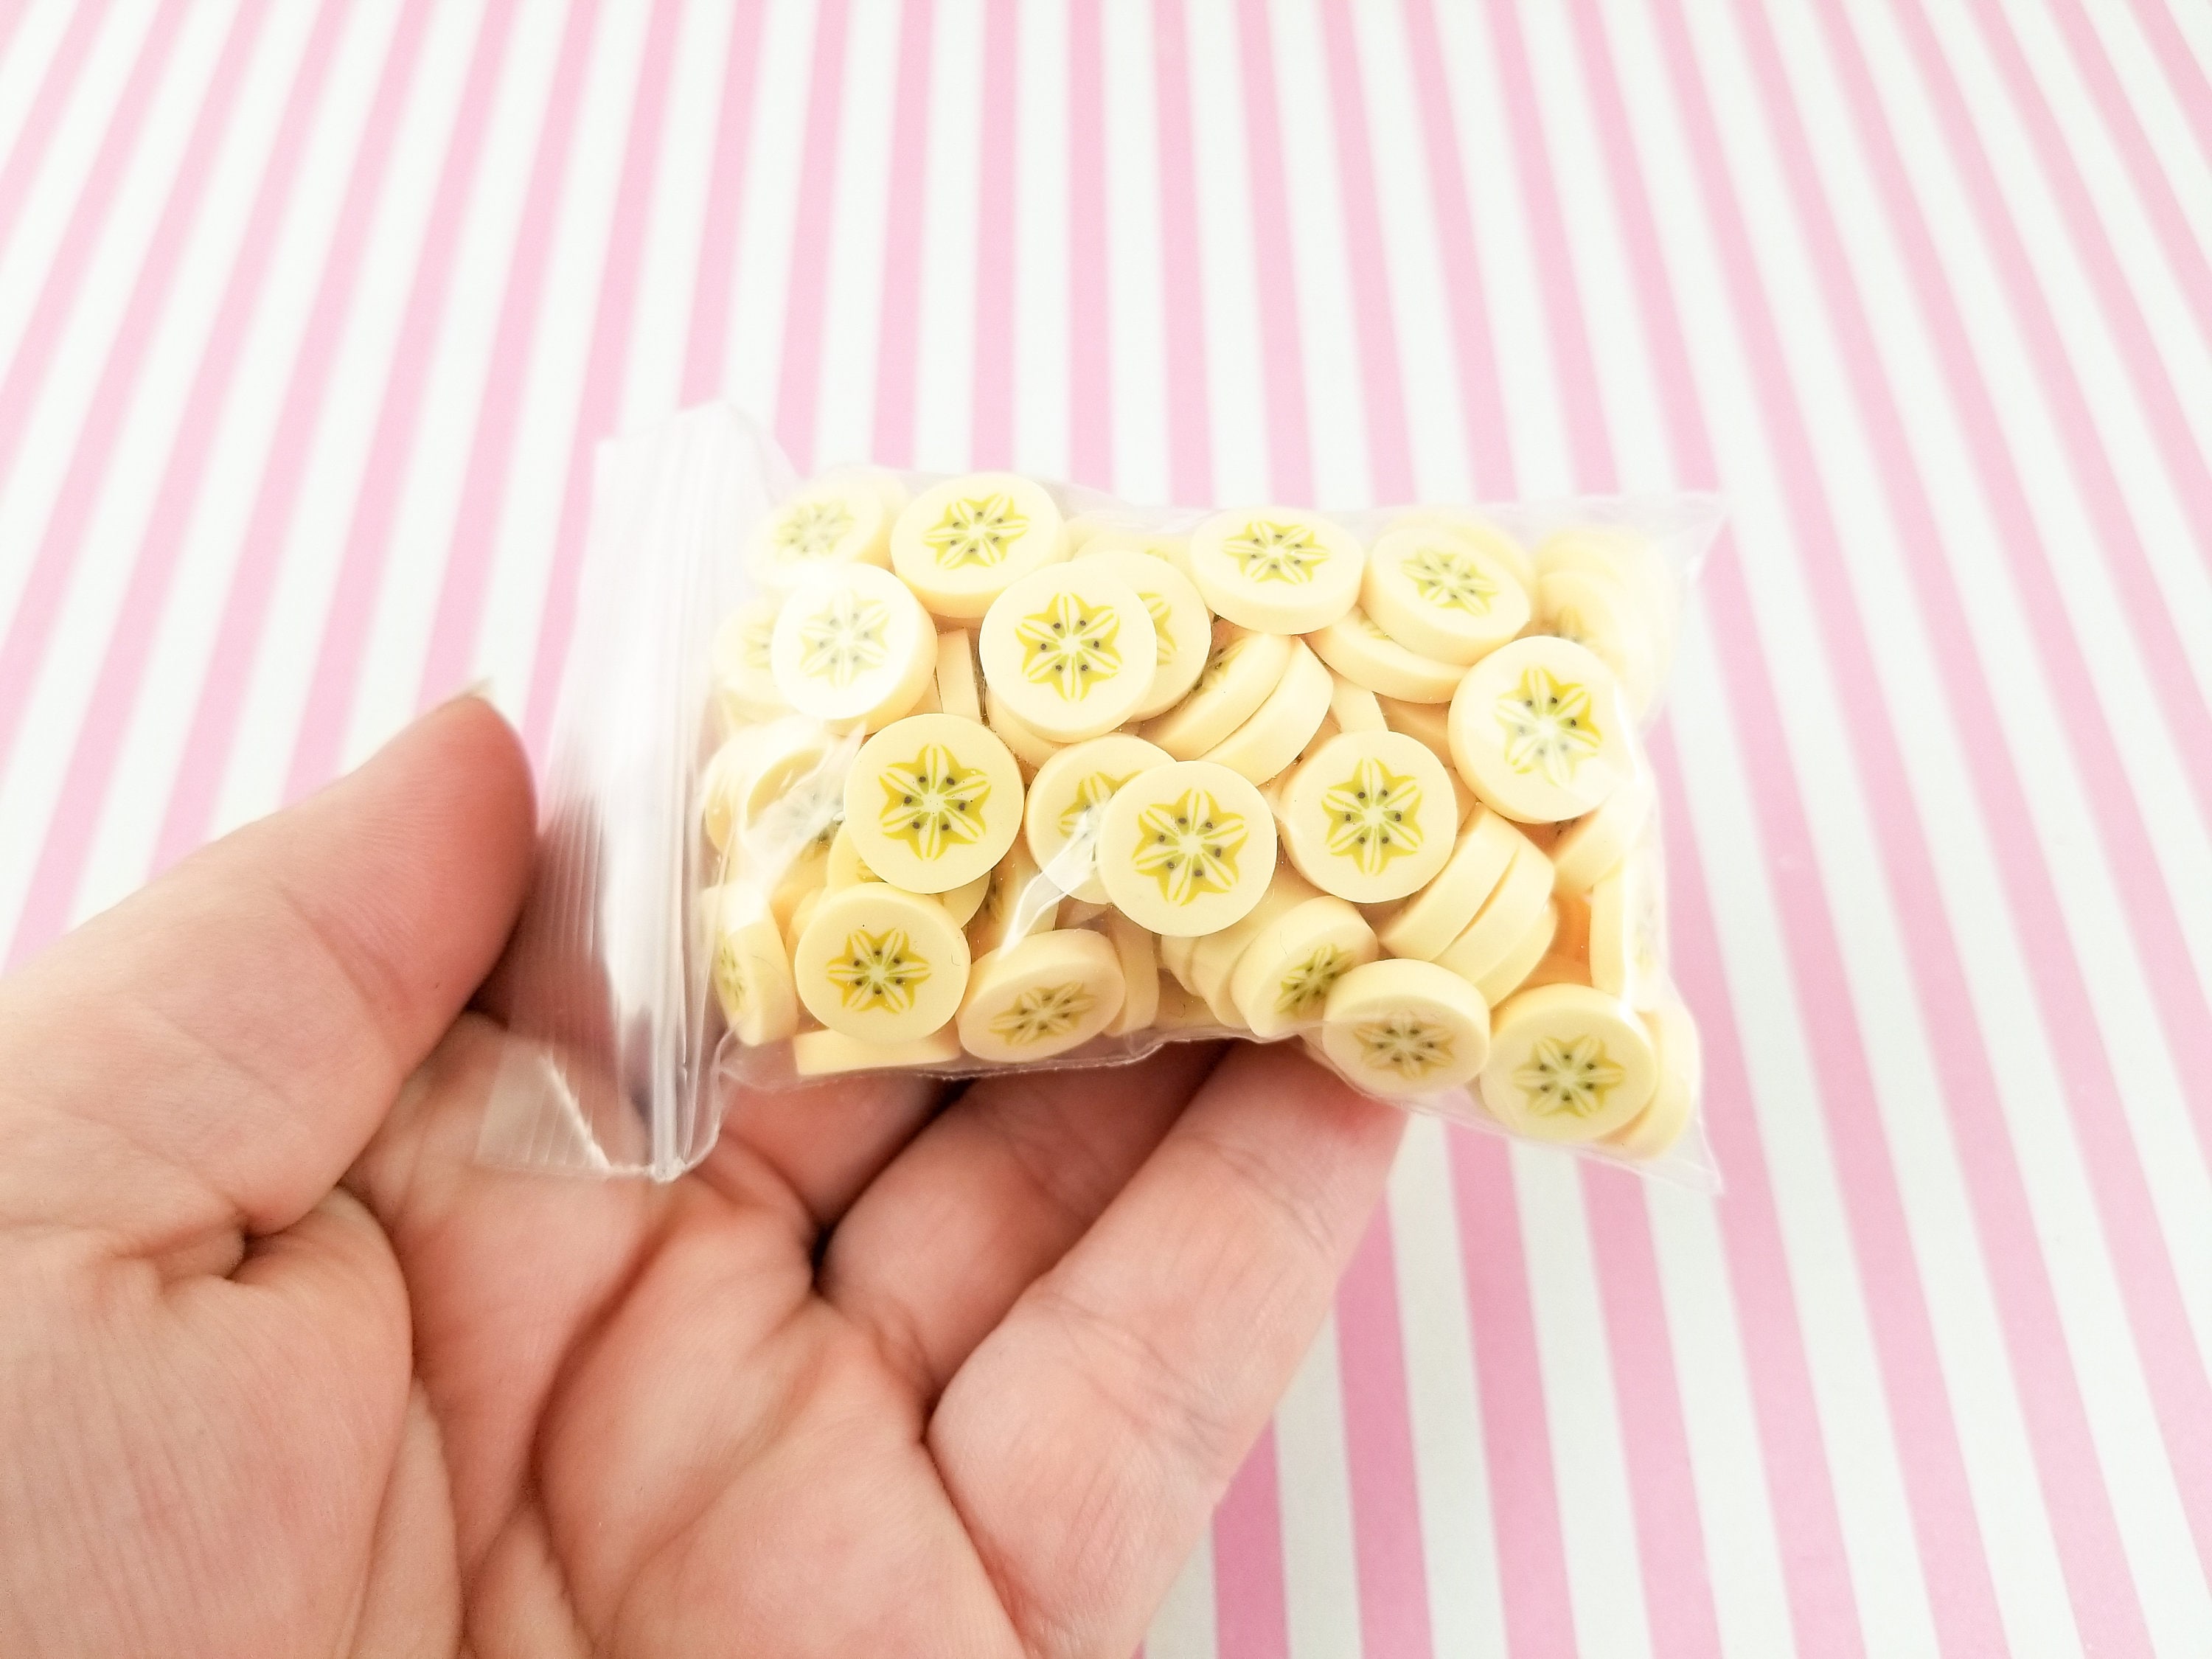 20g/bag Polymer Clay Slices 3D 5mm Polymer Clay Sticker Fruit Series Banana  Pear Cherry Coconut Pineapple